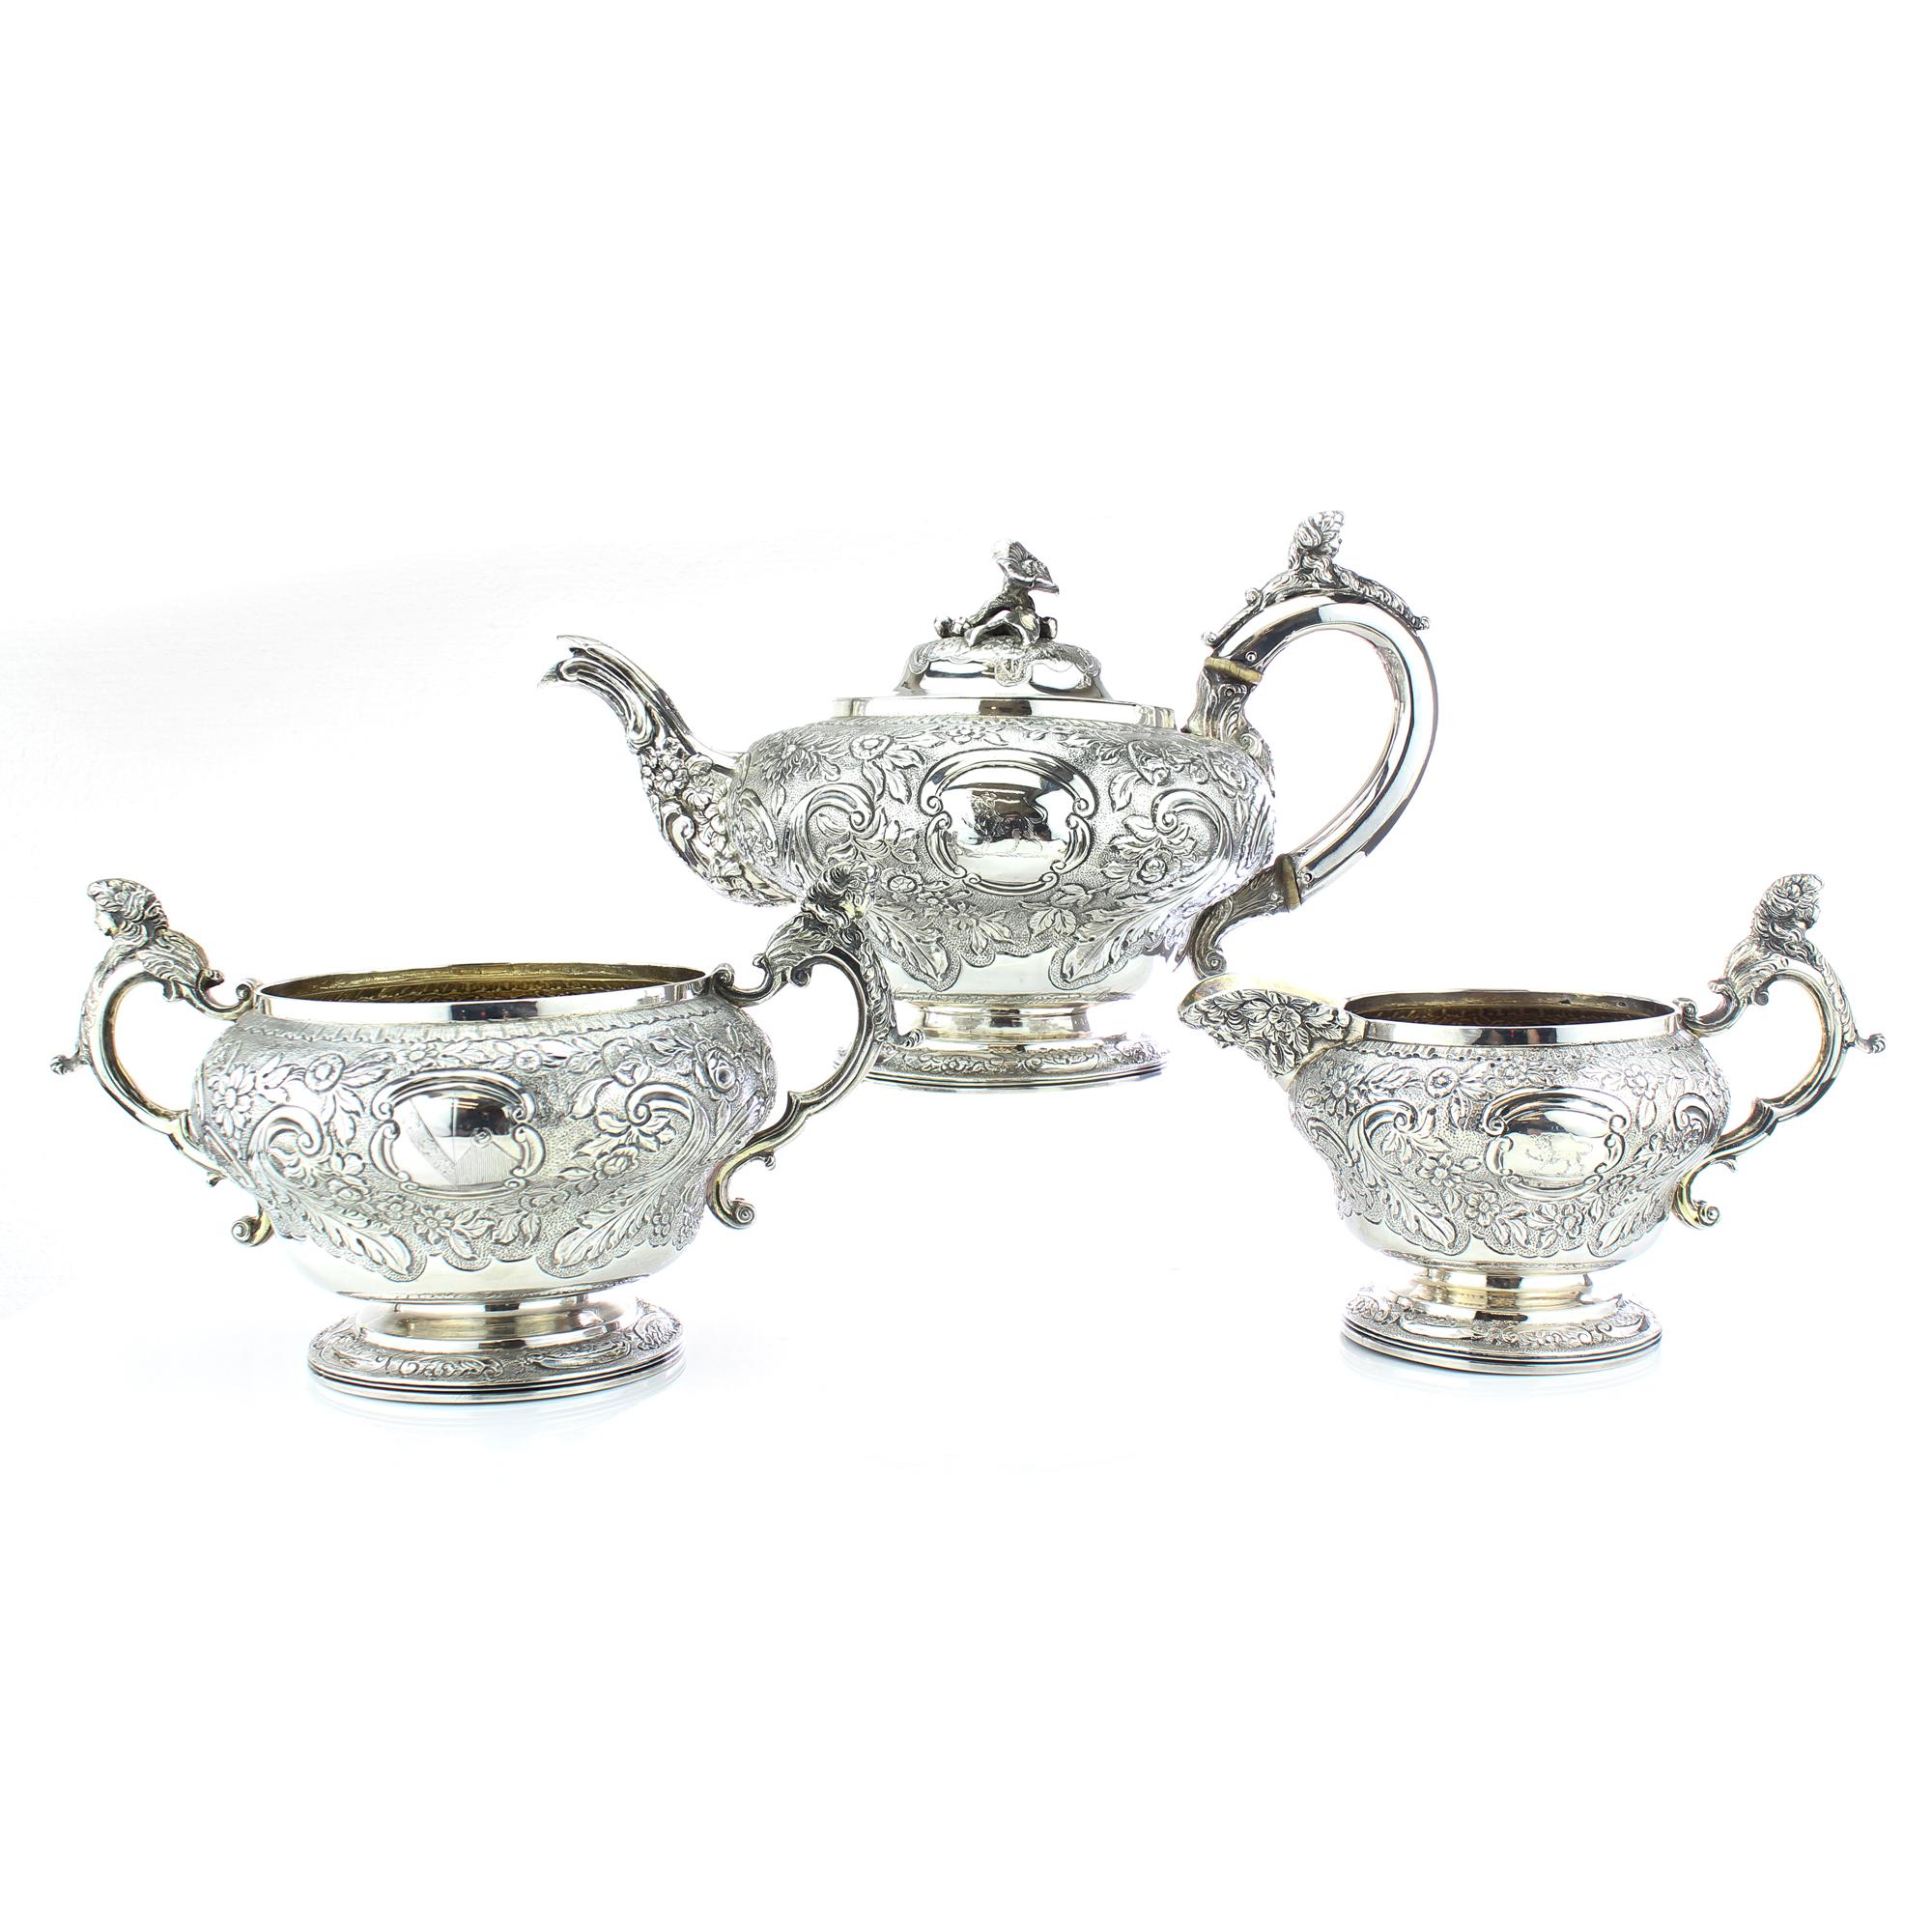 Antique Georgian sterling silver three-piece elaborately engraved tea service set.

The elegant Georgian era tea service has a design of intertwined C-scrolls, thumbprints and baguette motifs that are simply beautiful. The delicately polished